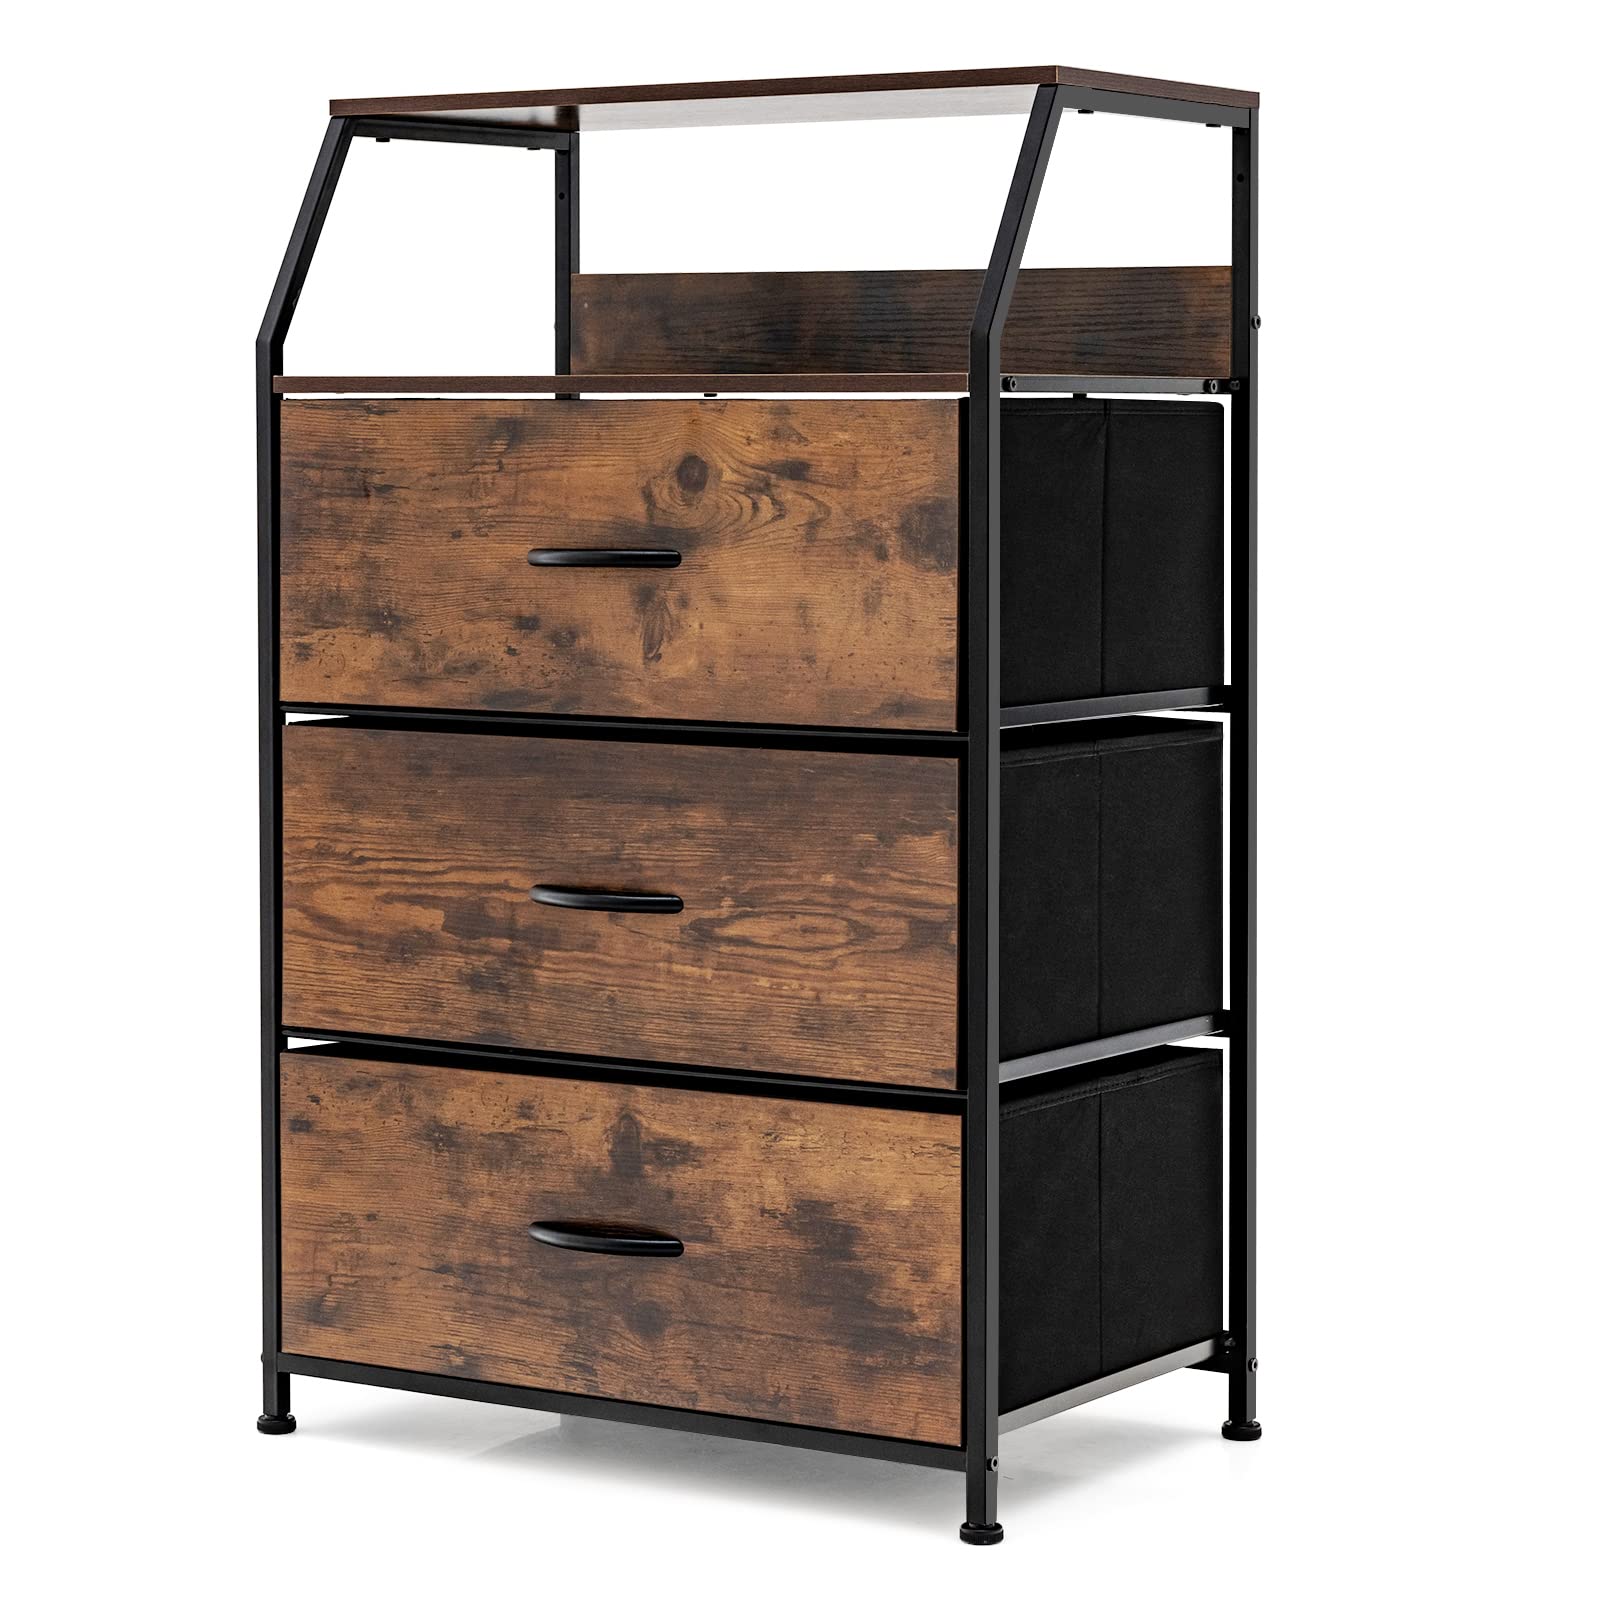 Giantex 3 Drawers Dresser, Storage Tower w/Foldable Fabric Drawers & Open Shelves, Wooden Top & Metal Frame